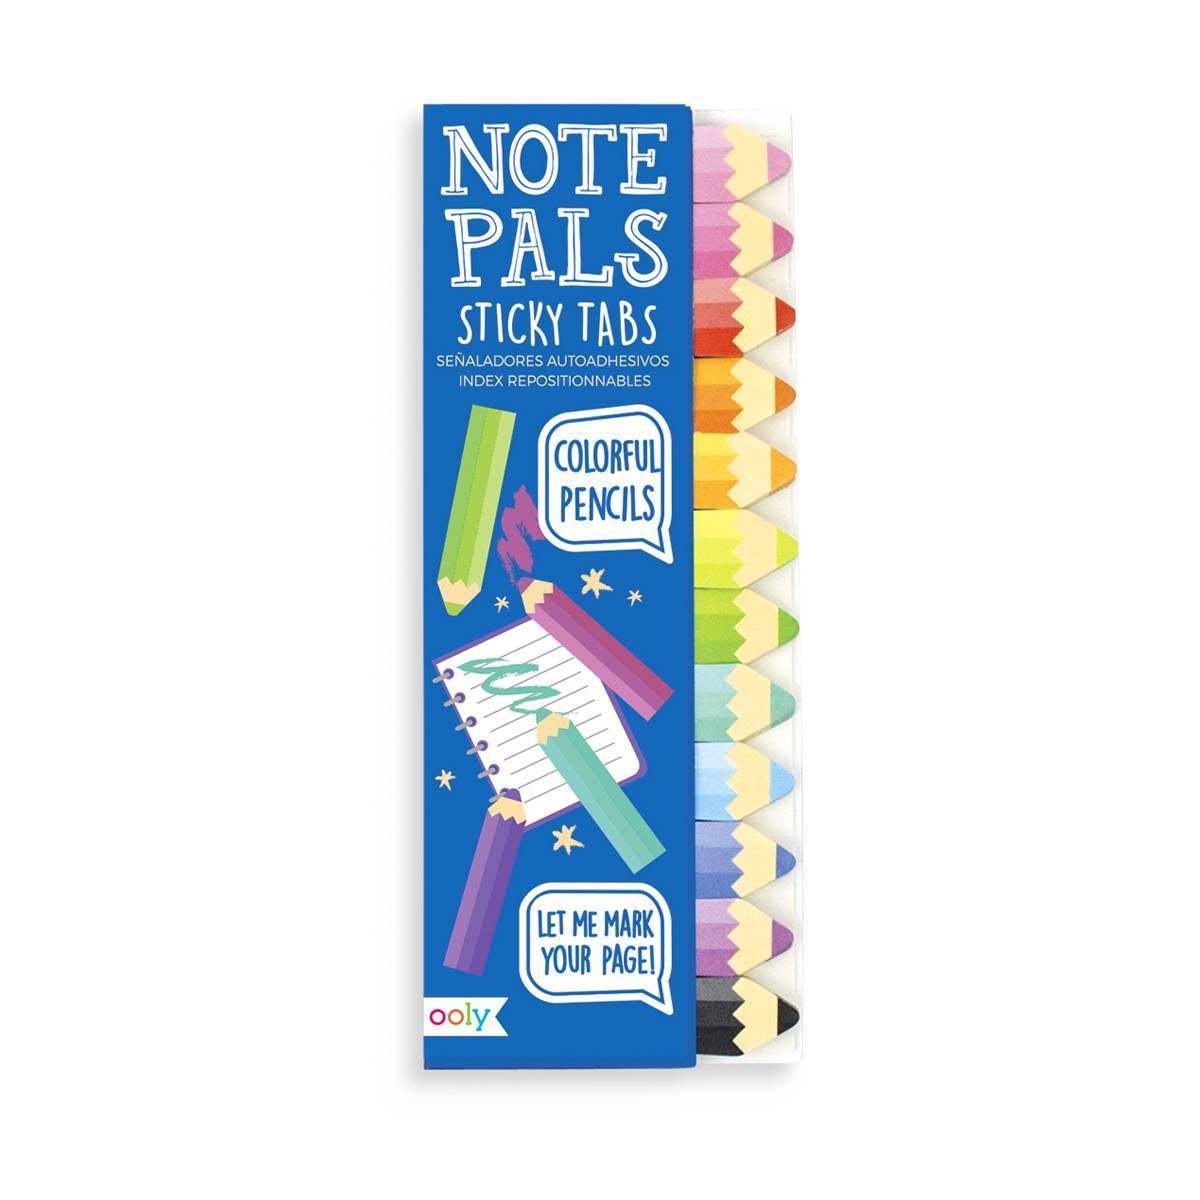 Ooly Note Pals Sticky Notes - Colourful Pencils